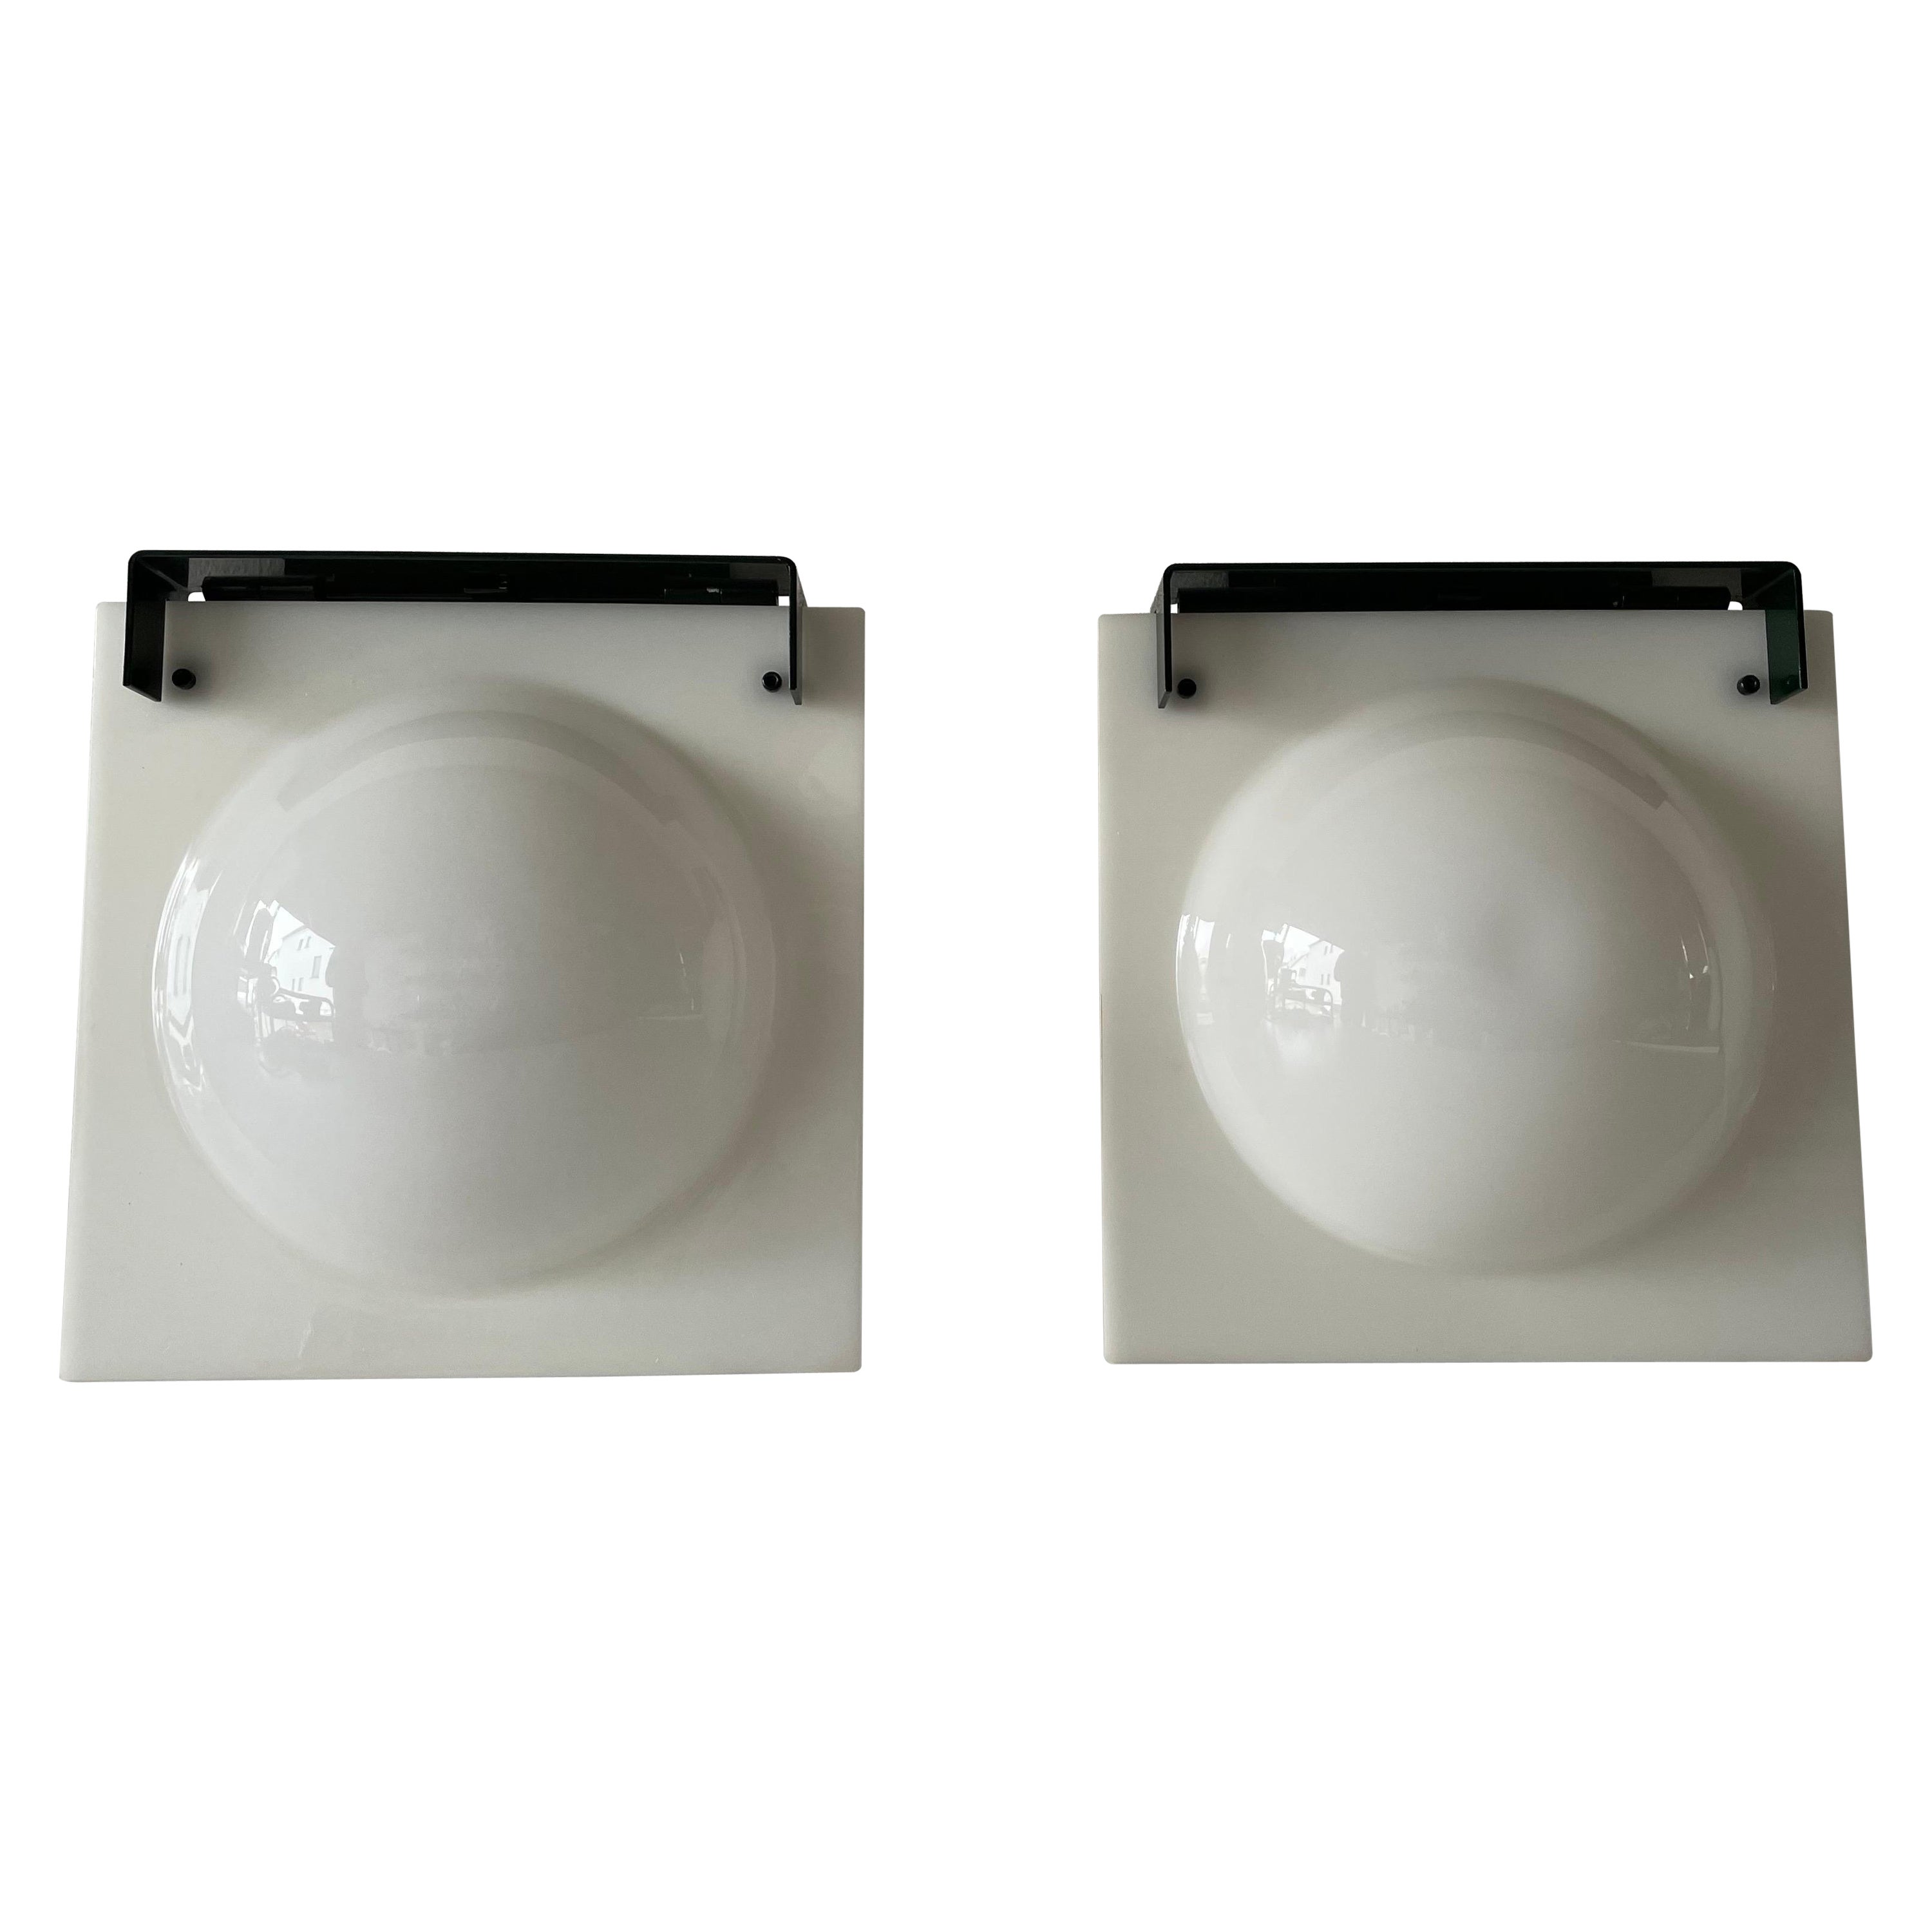 High Quality Plexiglass Bubble Design Pair of Wall Lamps, 1960s, Italy For Sale